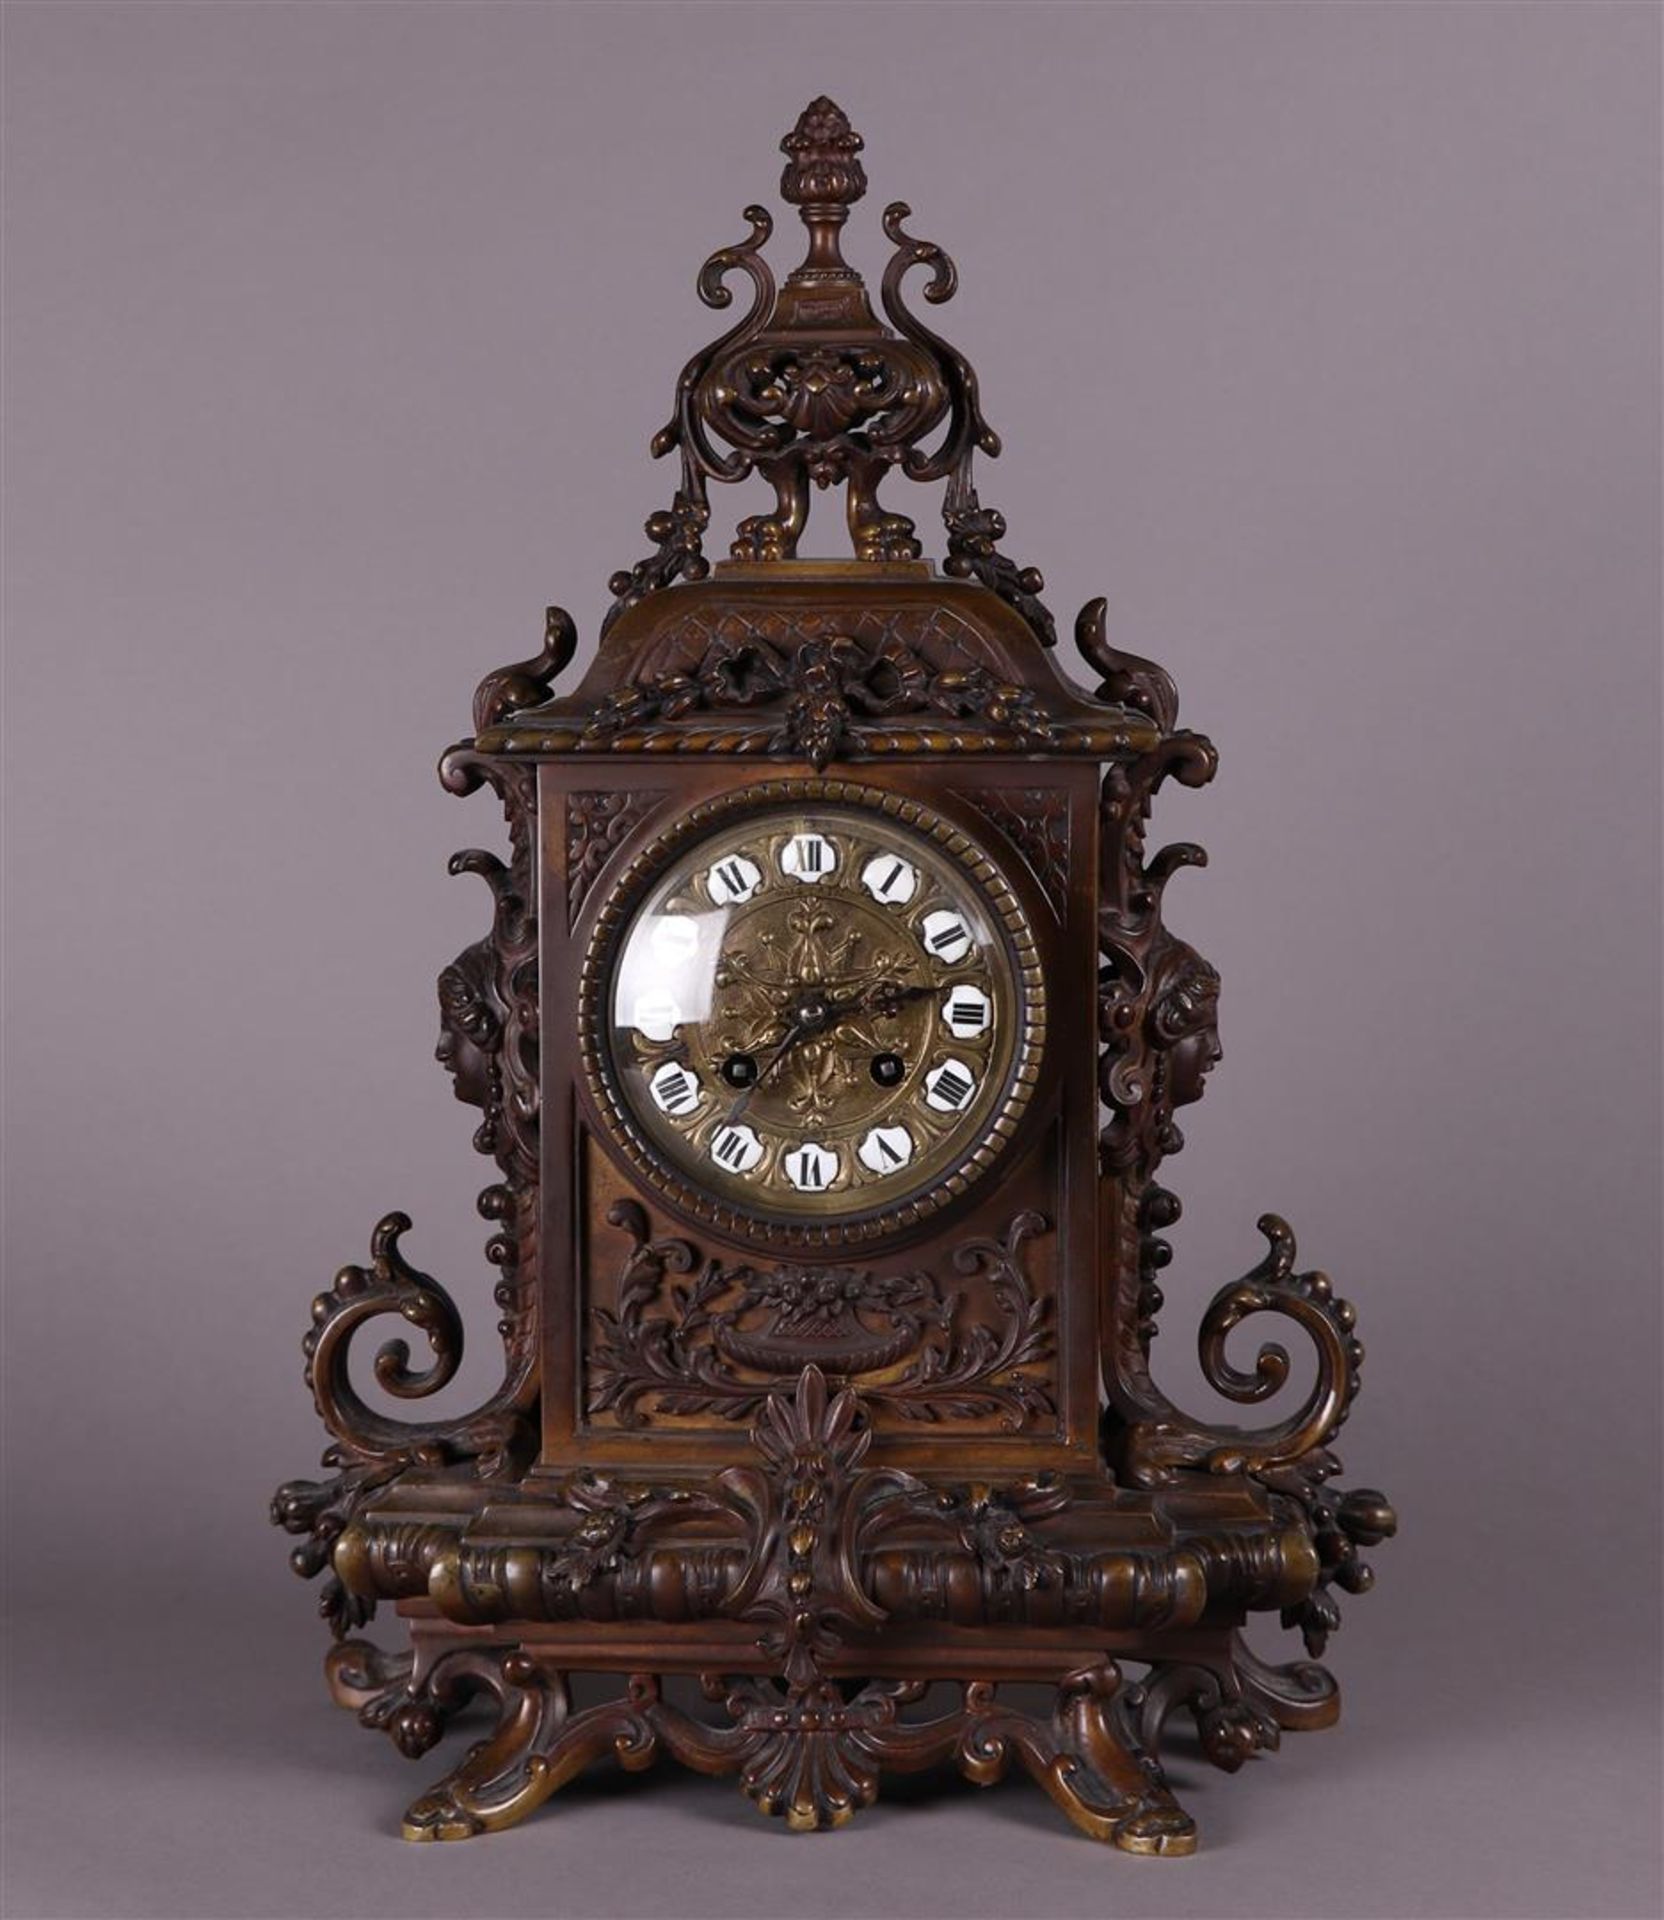 A heavy bronze mantel clock with matching key, ca. 1880.